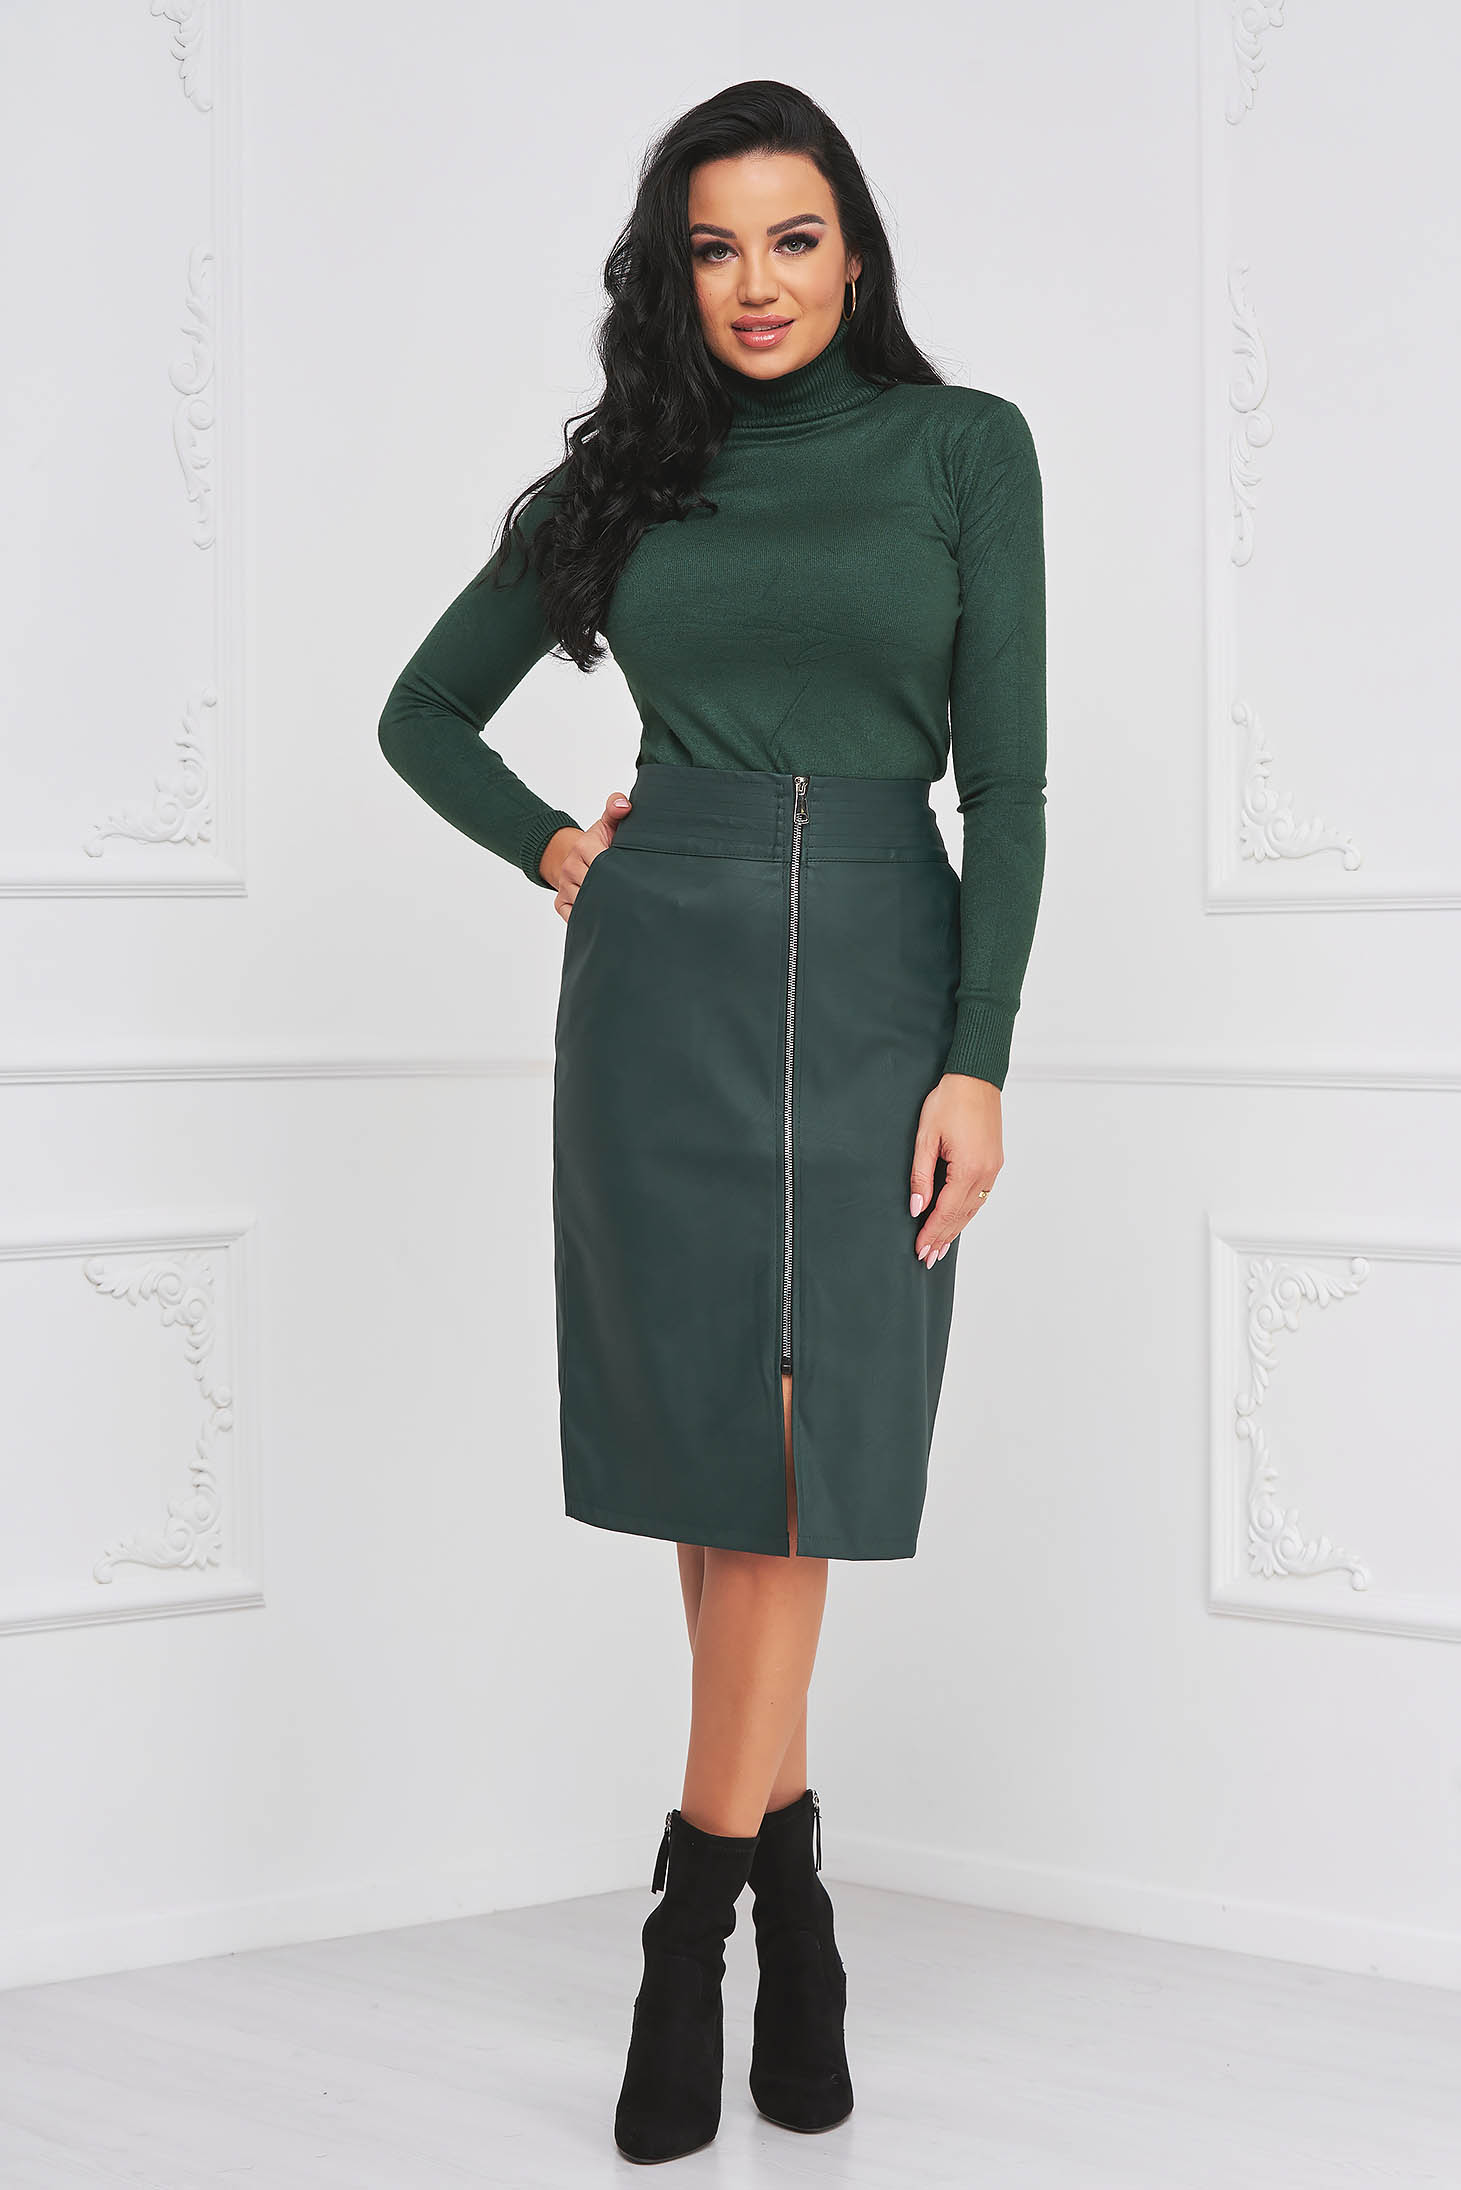 Darkgreen skirt high waisted from ecological leather pencil